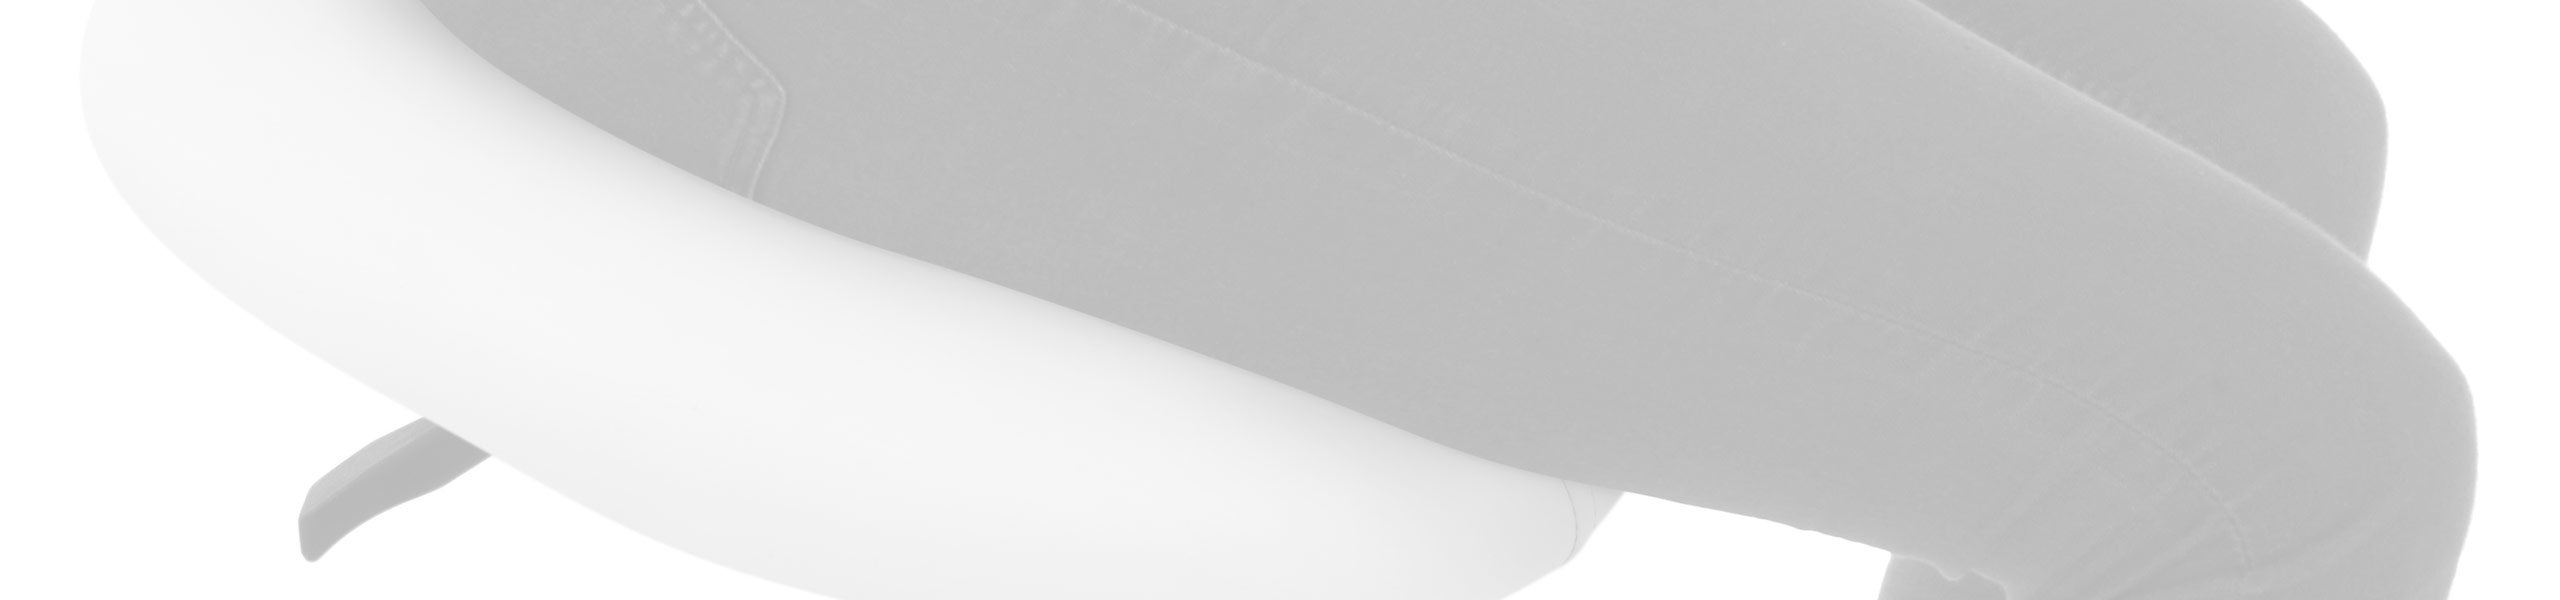 Deluxe Saddle Stool White Review Banner